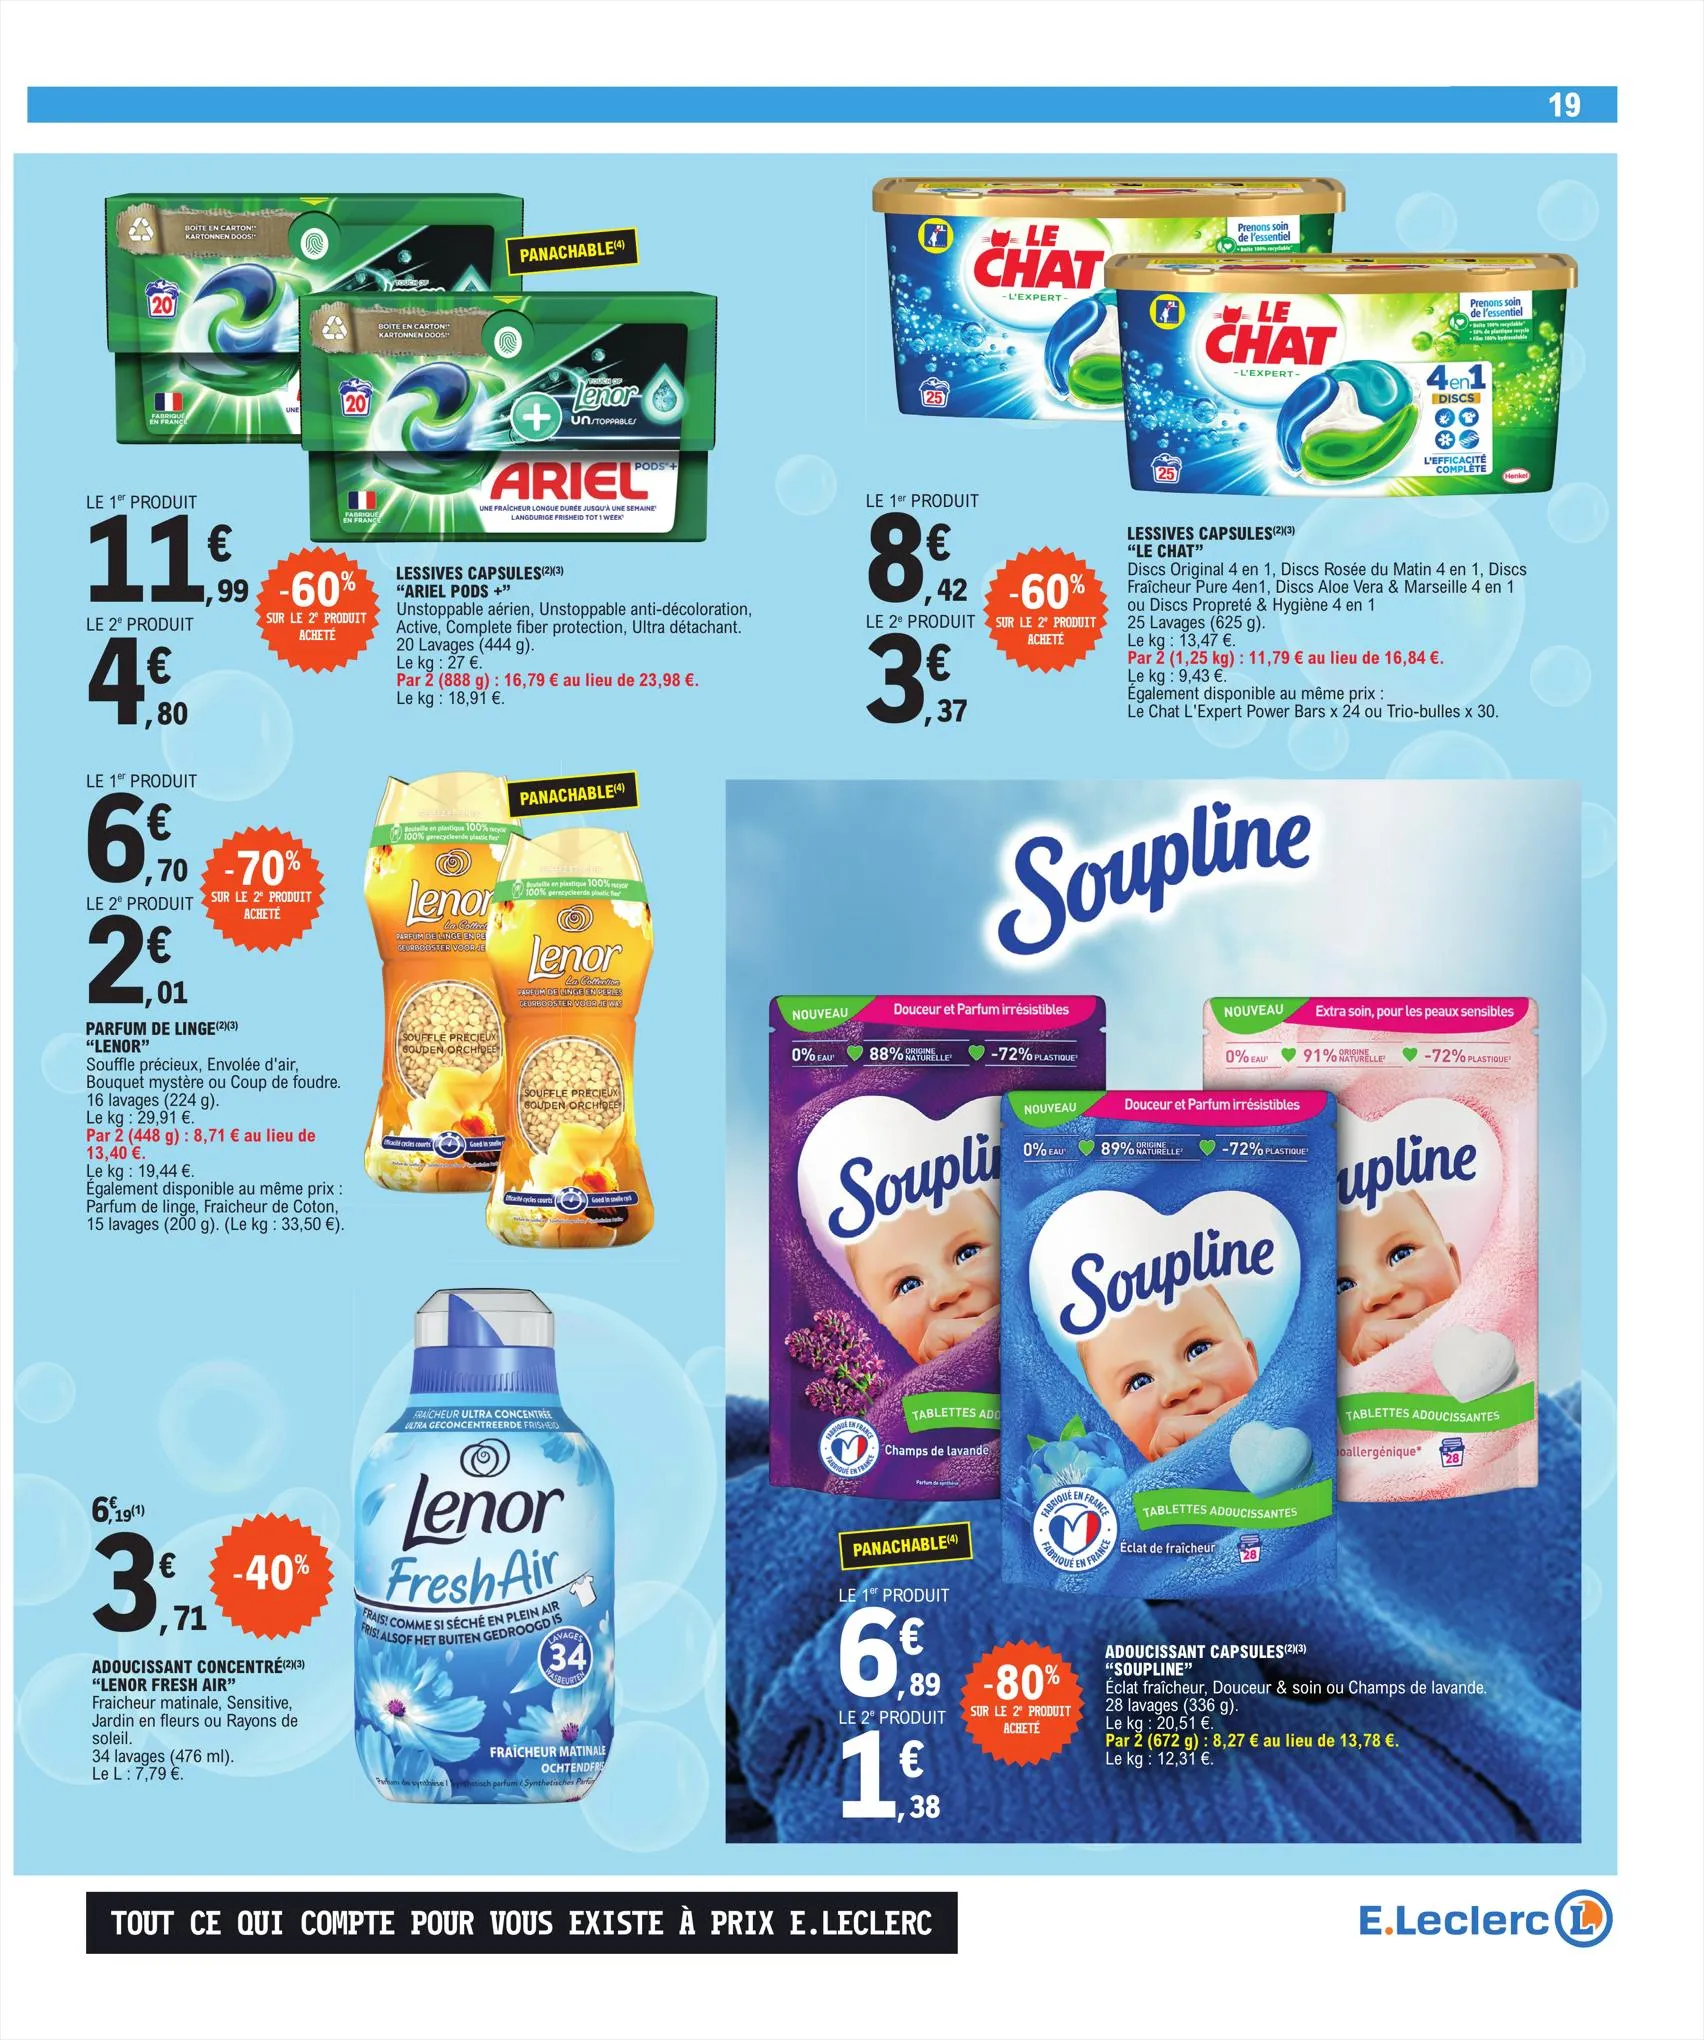 Catalogue Relance Alimentaire 11 - Mixte, page 00019